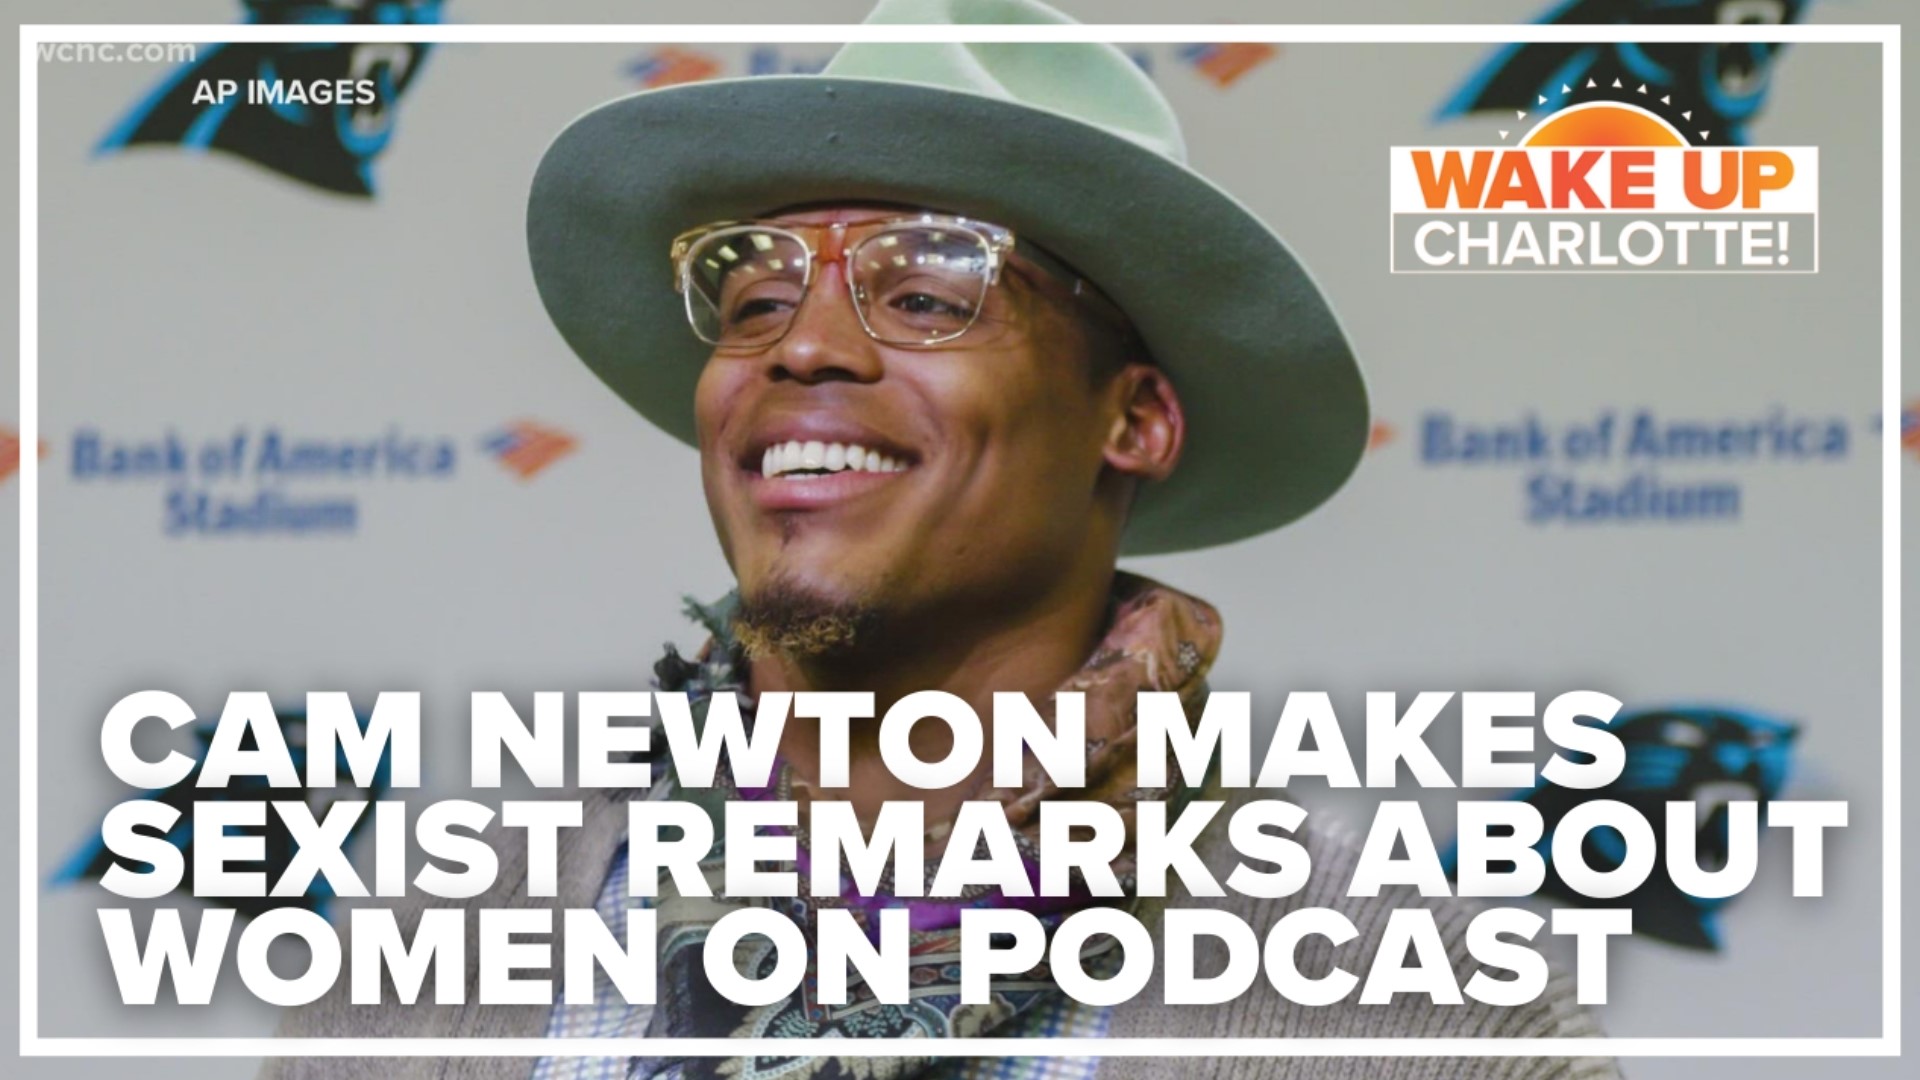 Cam Newton comments about women on podcast called Million Dollaz Worth of Game.